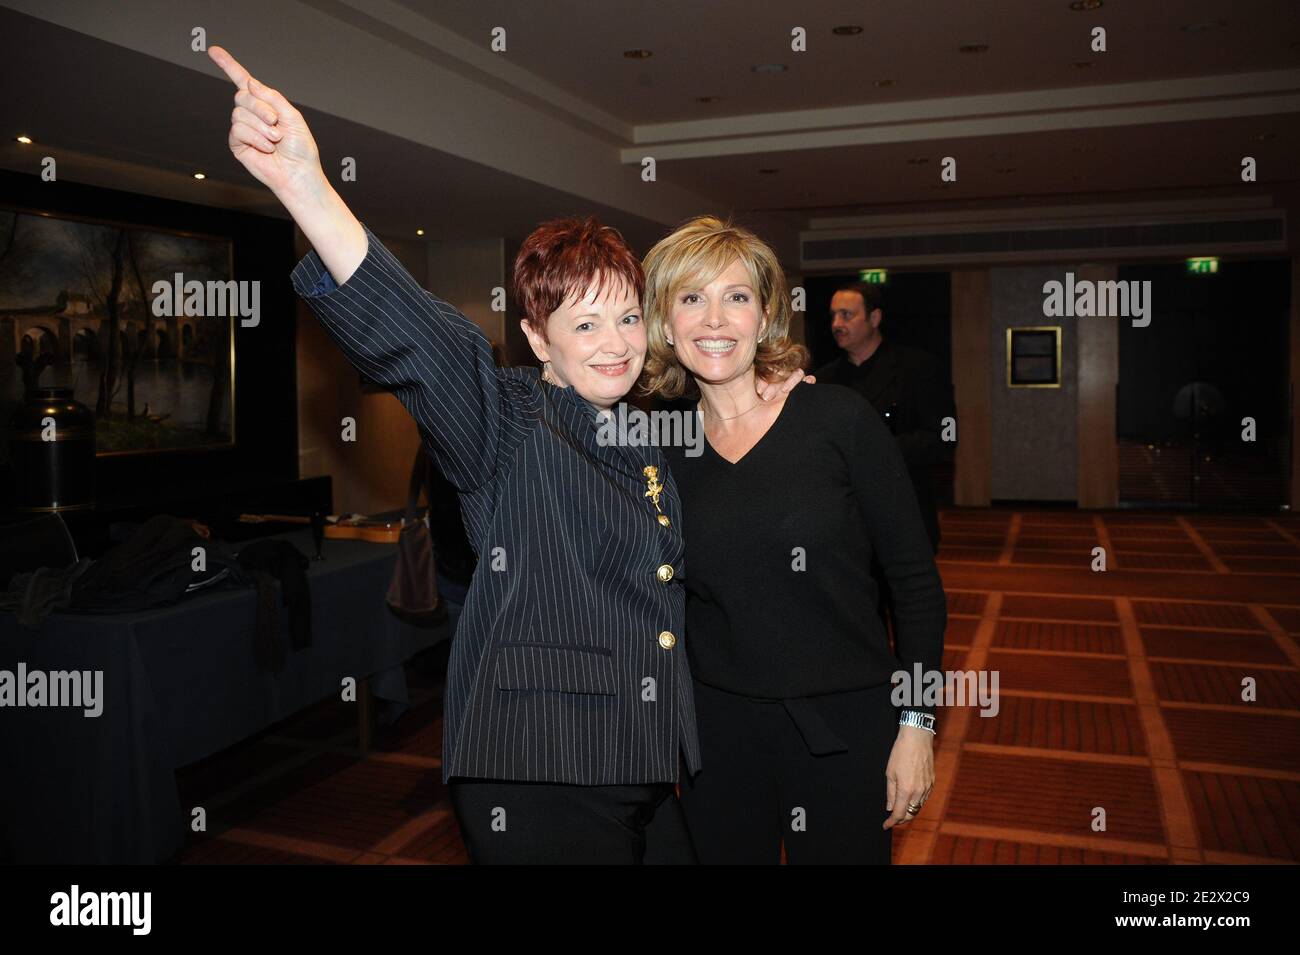 Fabienne Thibault and Fabienne Amiach during the charity Gala 'La Tele Qui Chante' at the Meridien in Paris, France on April 12, 2010. Photo by Nicolas Briquet/ABACAPRESS.COM Stock Photo